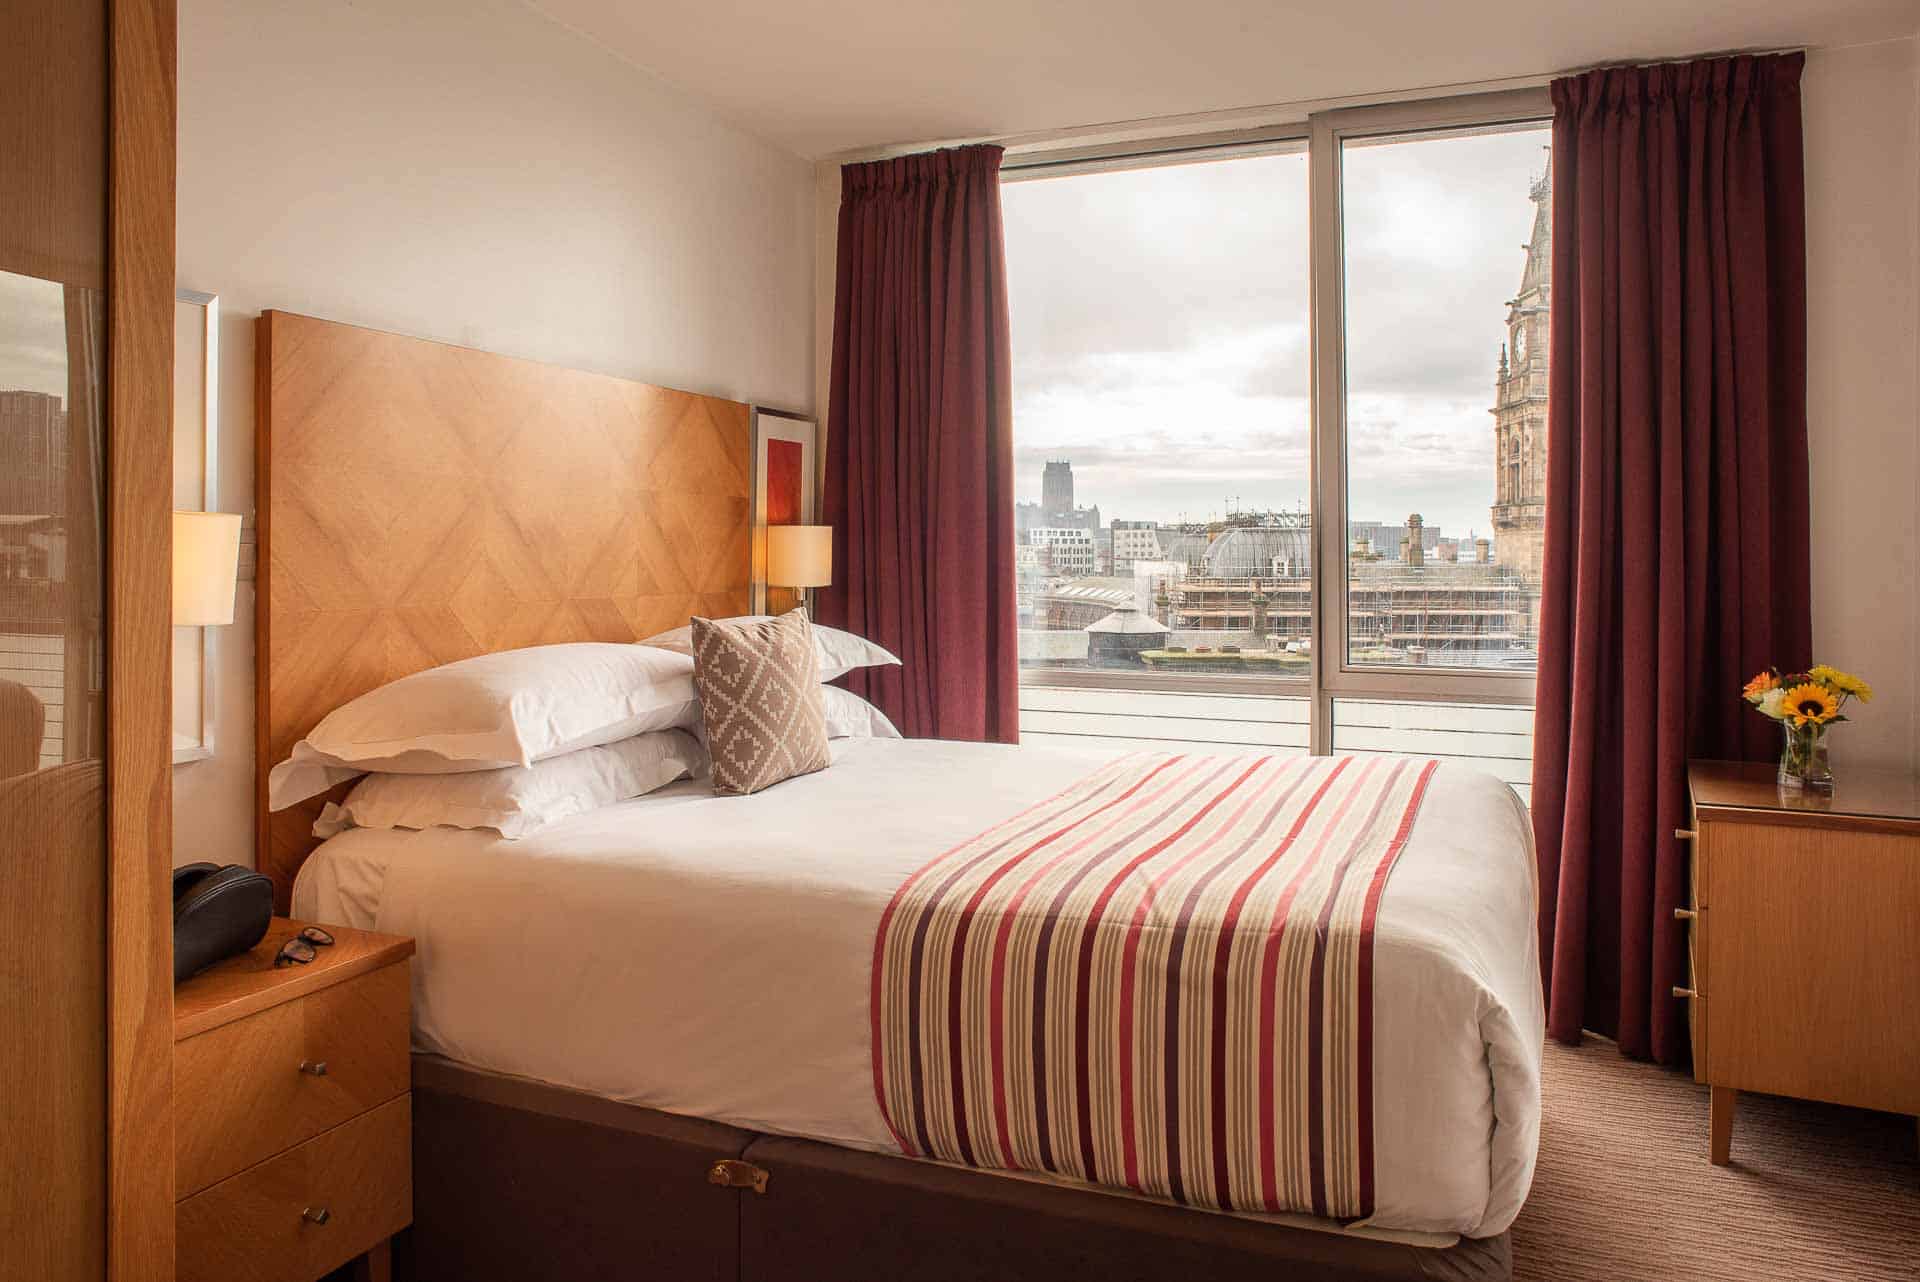 Spacious bedroom with natural light and views of the city at PREMIER SUITES Liverpool